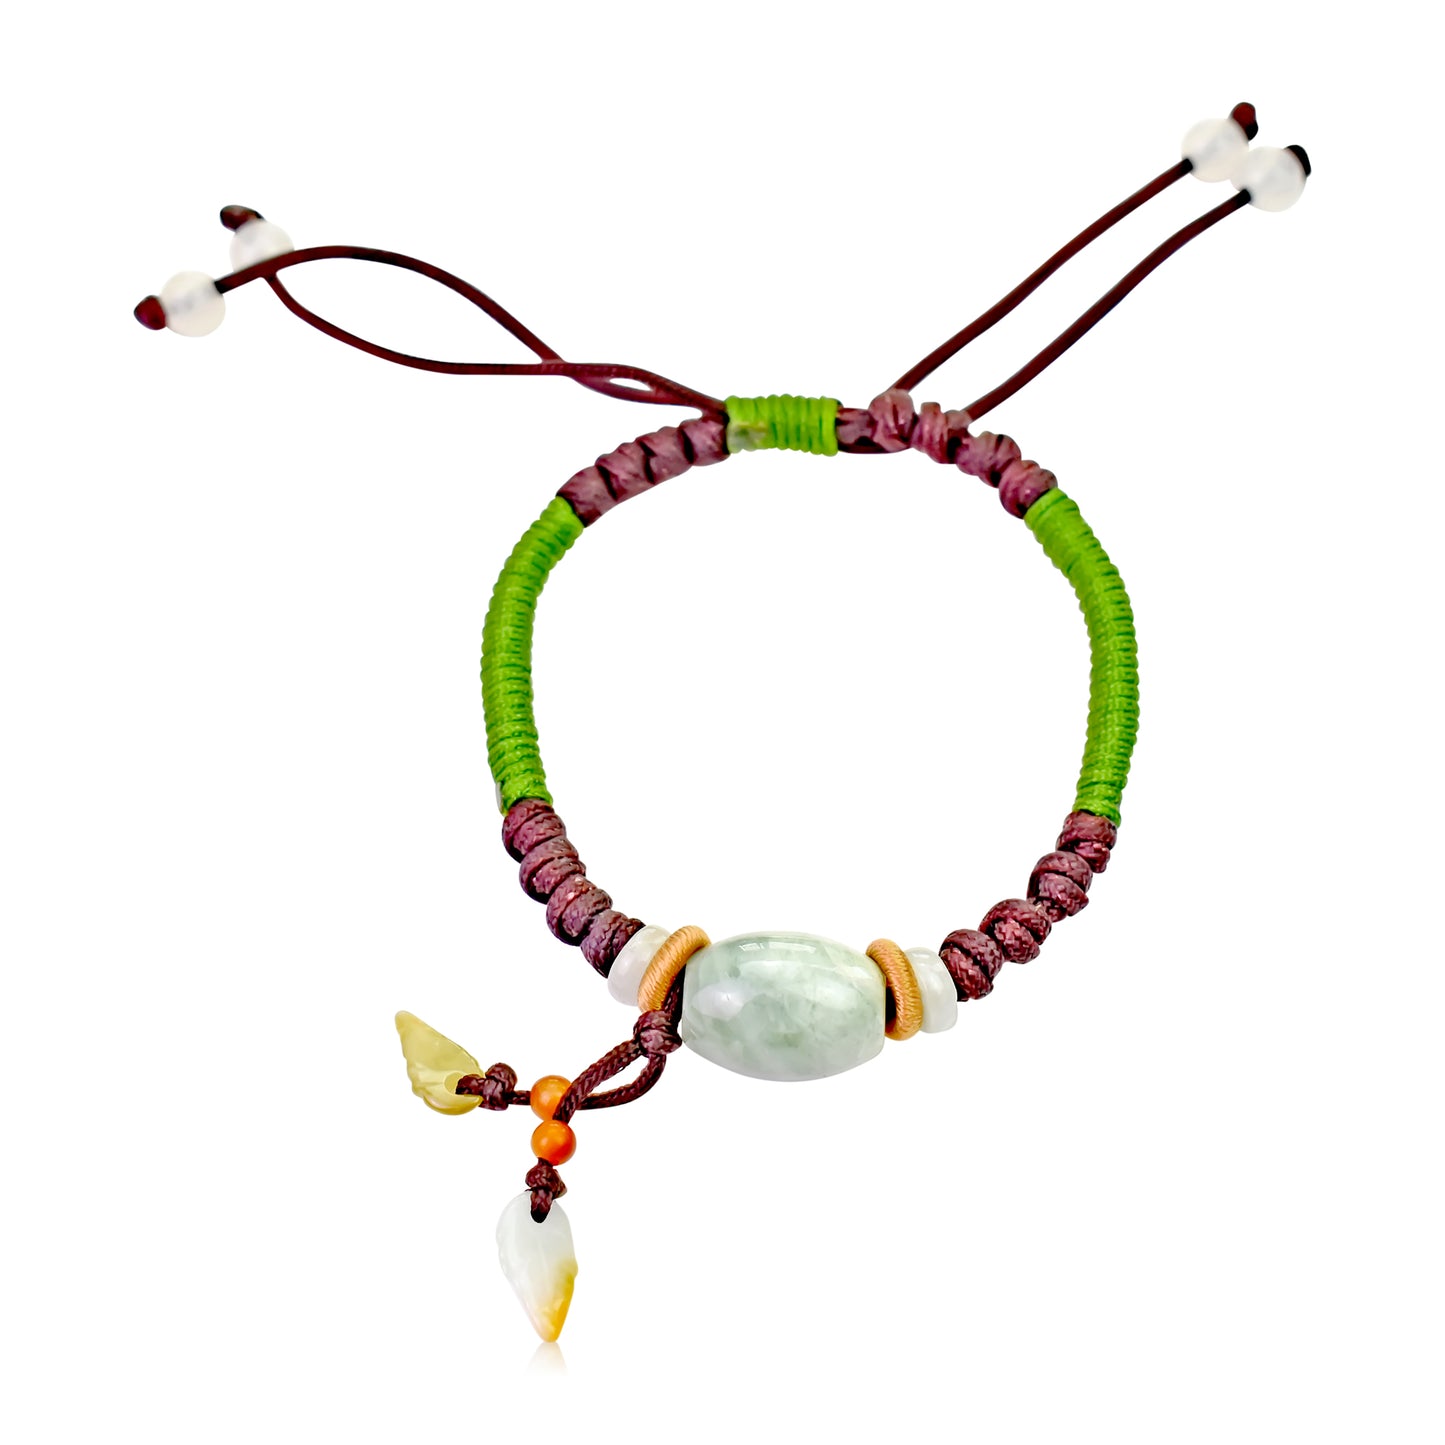 Show Off Your Personal Style with Cute Oblong Shaped Beads Jade Bracelet